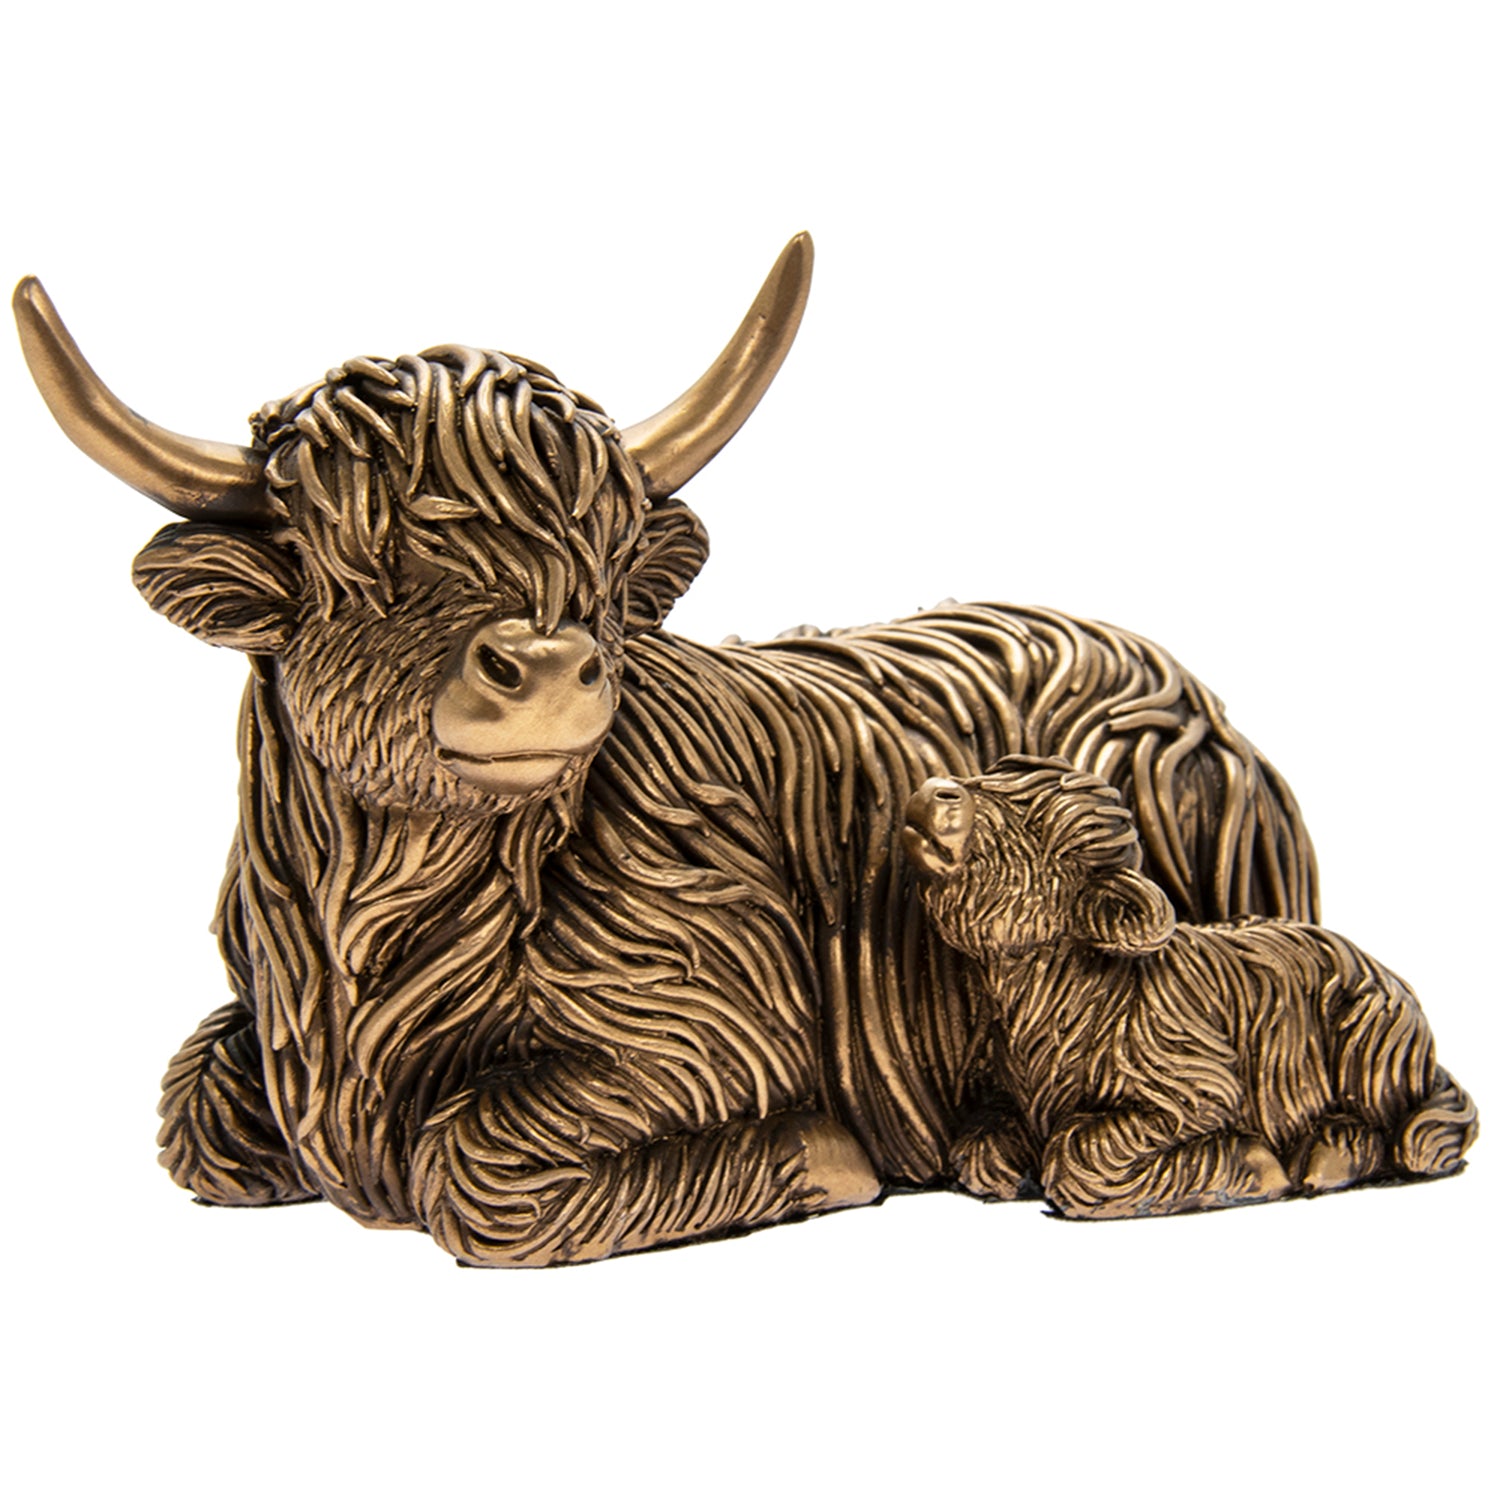 Reflections Bronzed Highland Cow and Calf Figurine